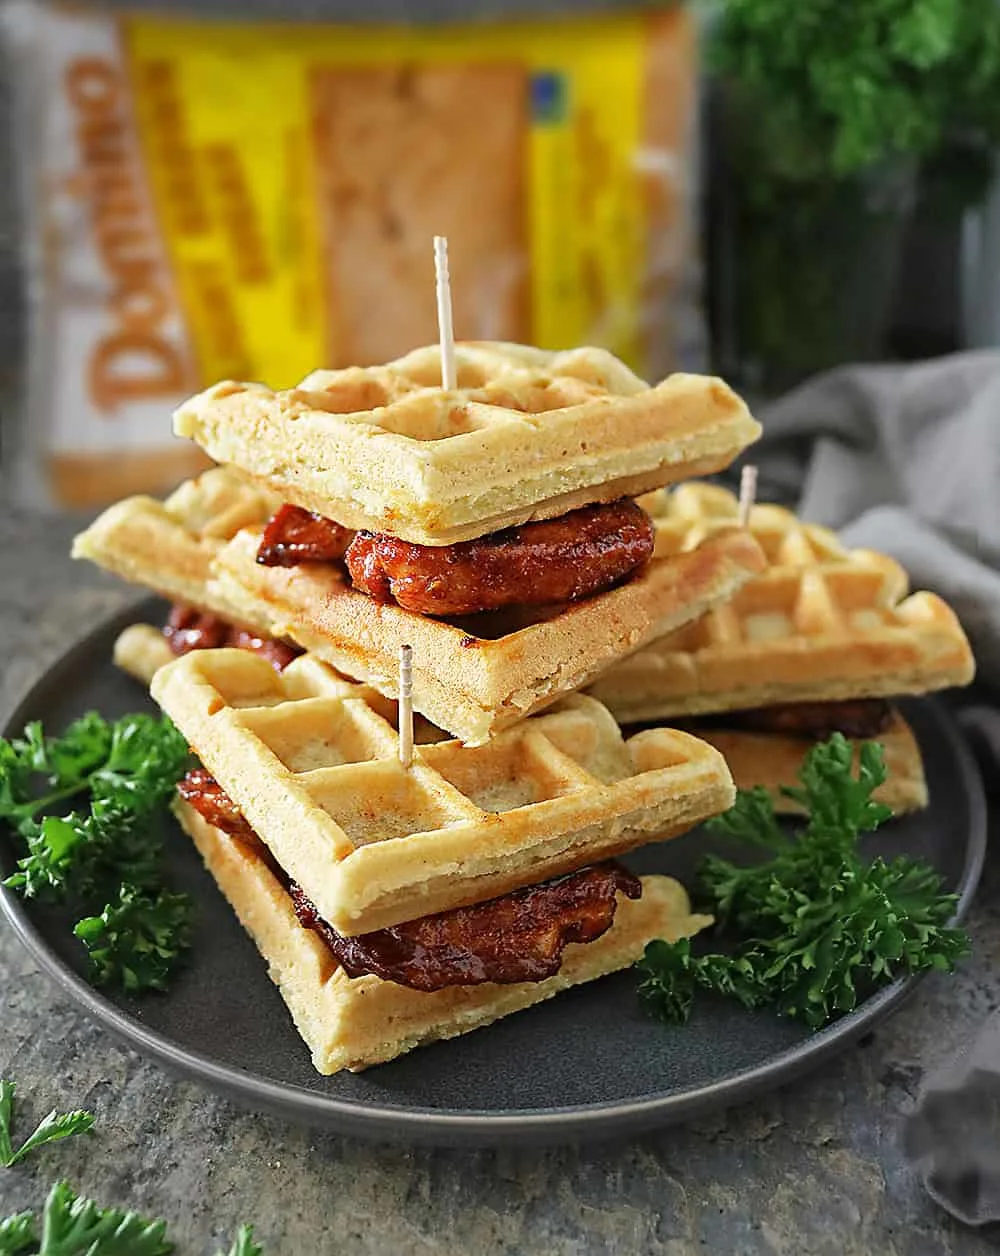 These Chicken and Waffle Sliders are easy to handle and oh so easy to enjoy!